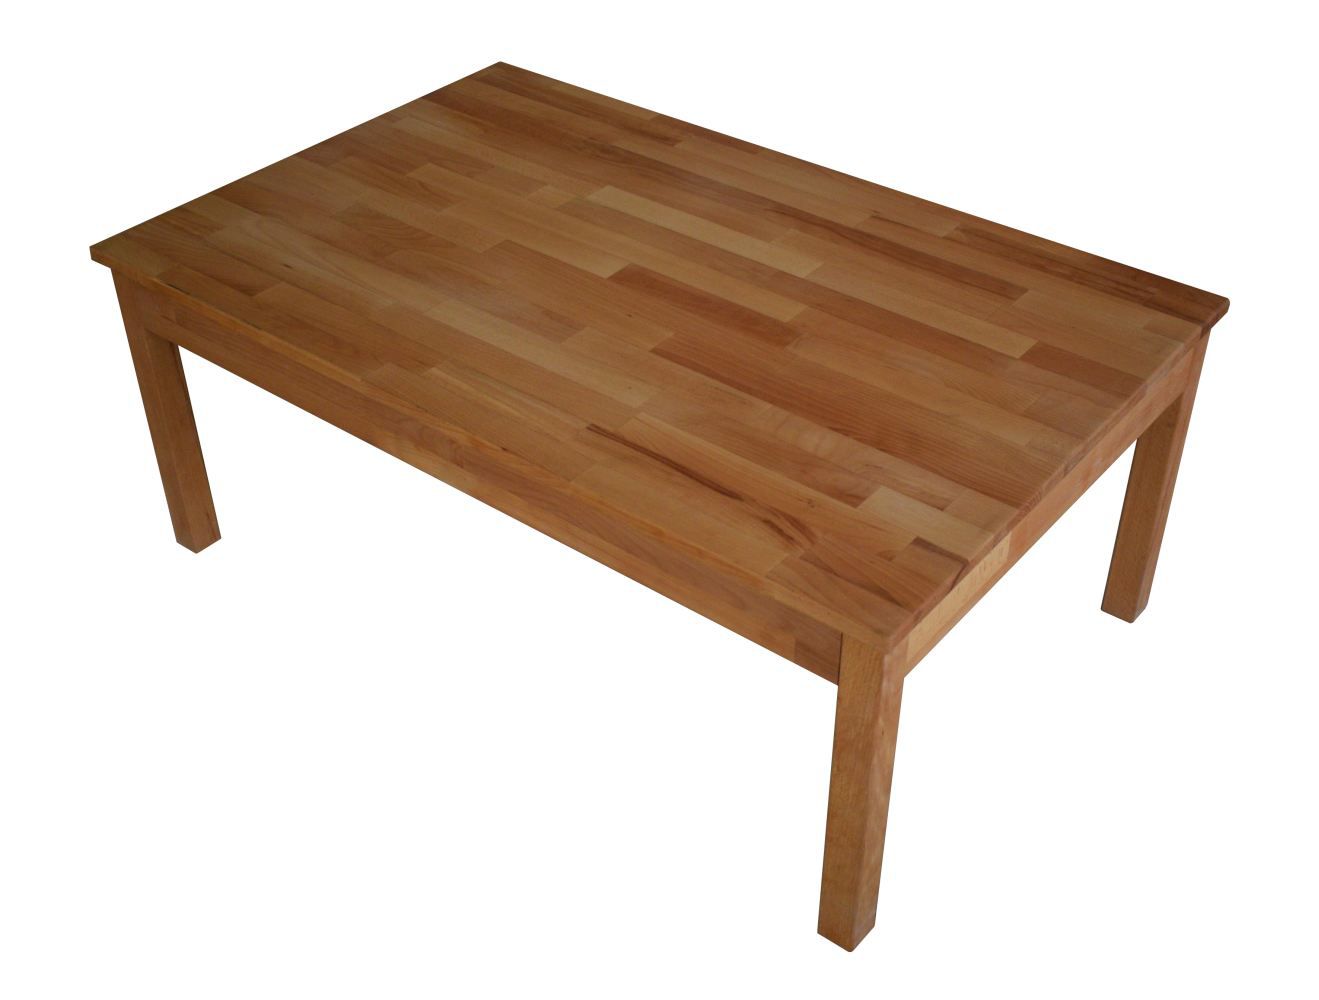 Coffee table Wooden Nature 204 solid beech Natural oiled - Measurements: 110 x 70 x 45 cm (W x D x H)